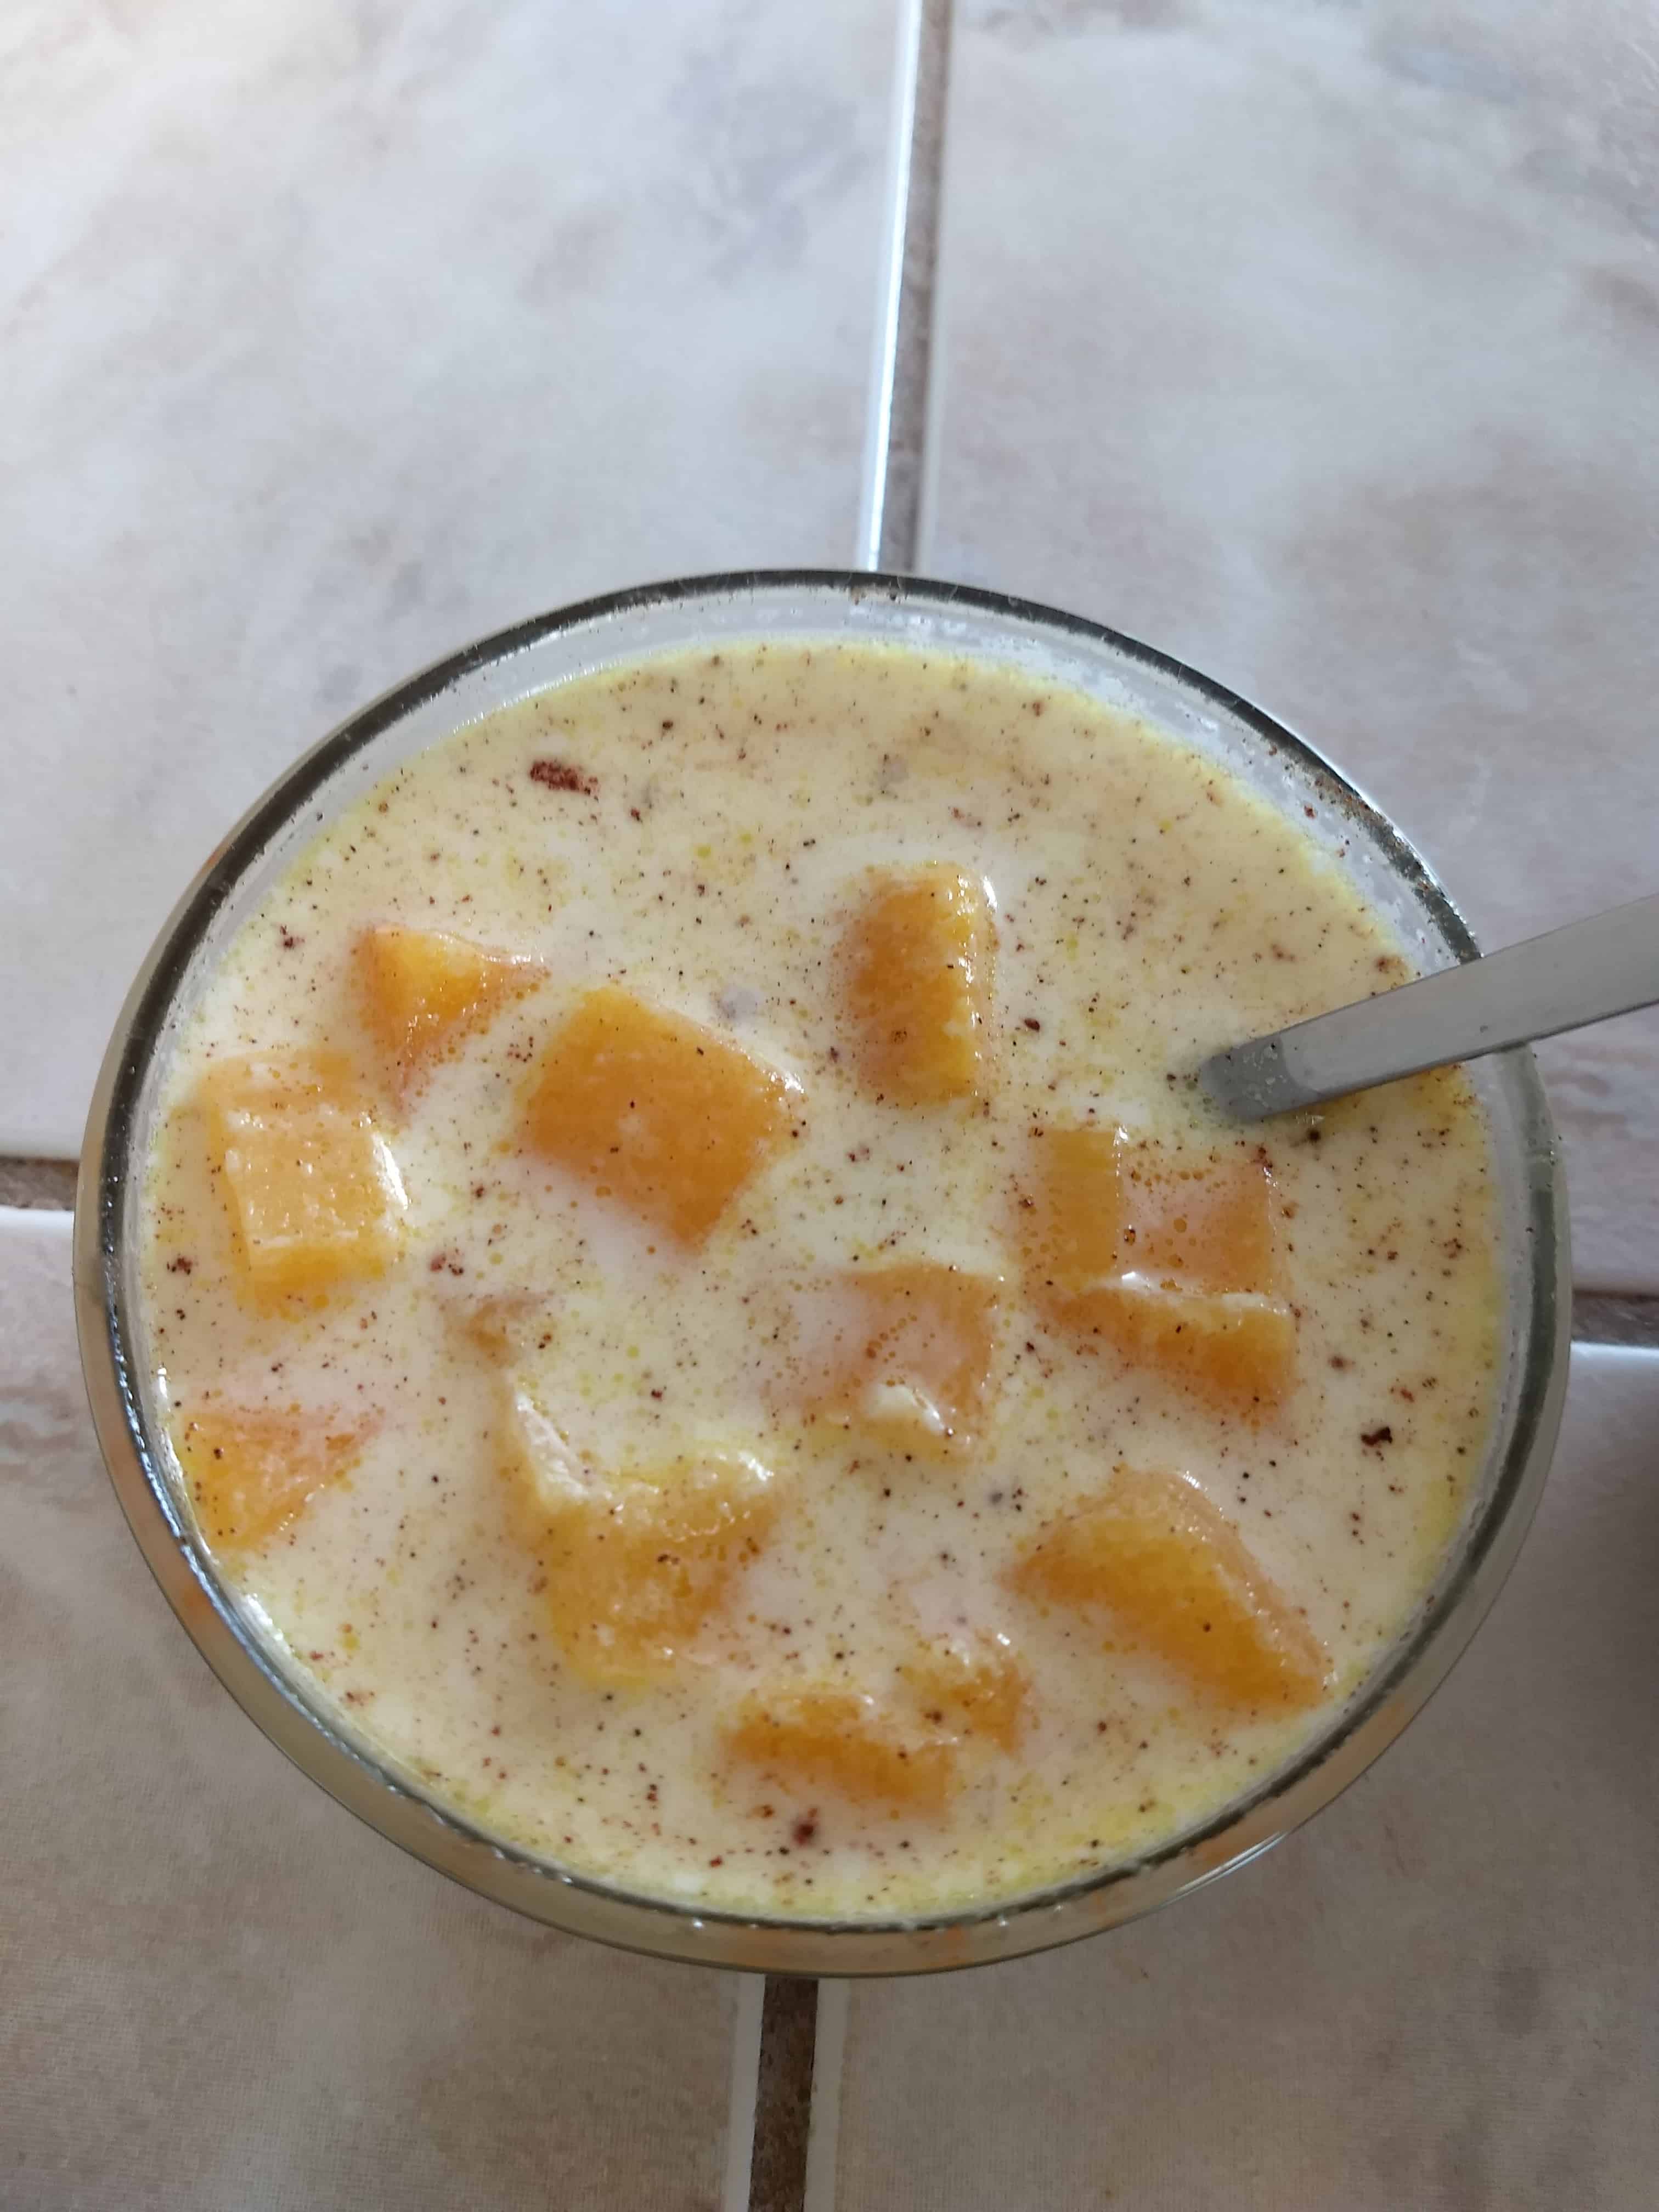 Low Carb Creamy Pumpkin Drink Recipe (was my childhood sweet in my country)